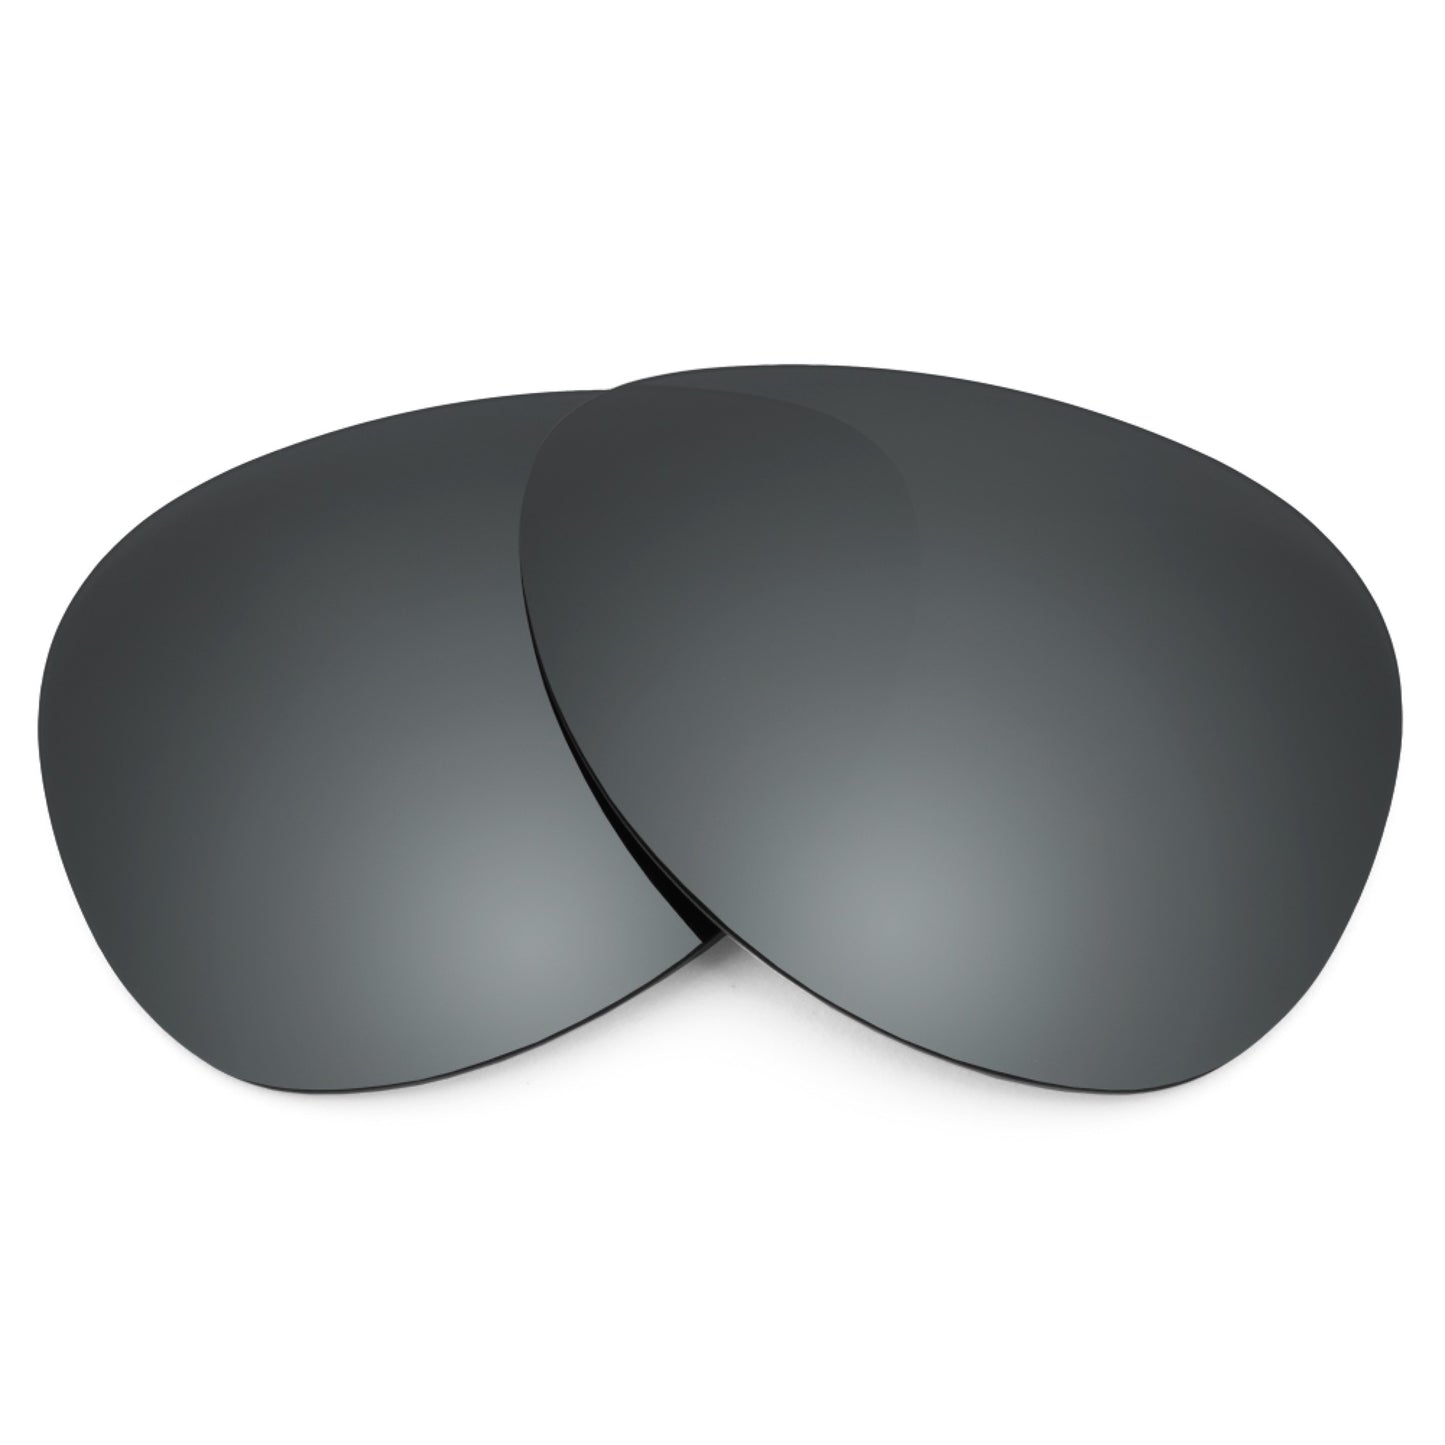 Revant replacement lenses for Ray-Ban Alex RB4201 59mm Non-Polarized Black Chrome